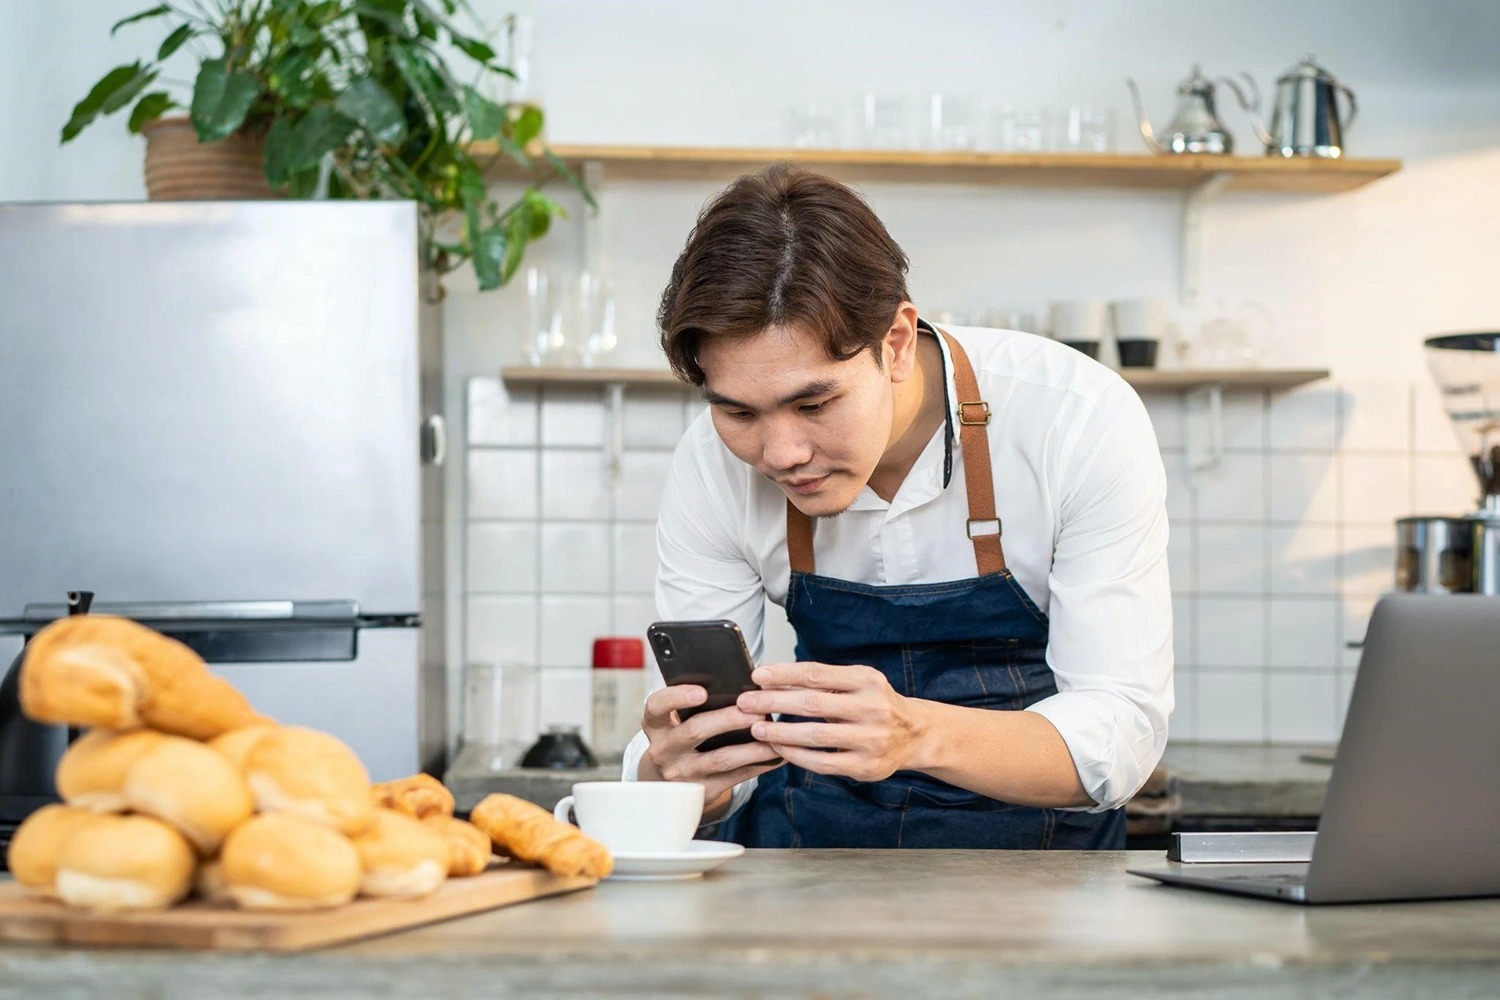 A man in an apron, showcasing his culinary creativity, is seen looking at his phone in a kitchen.